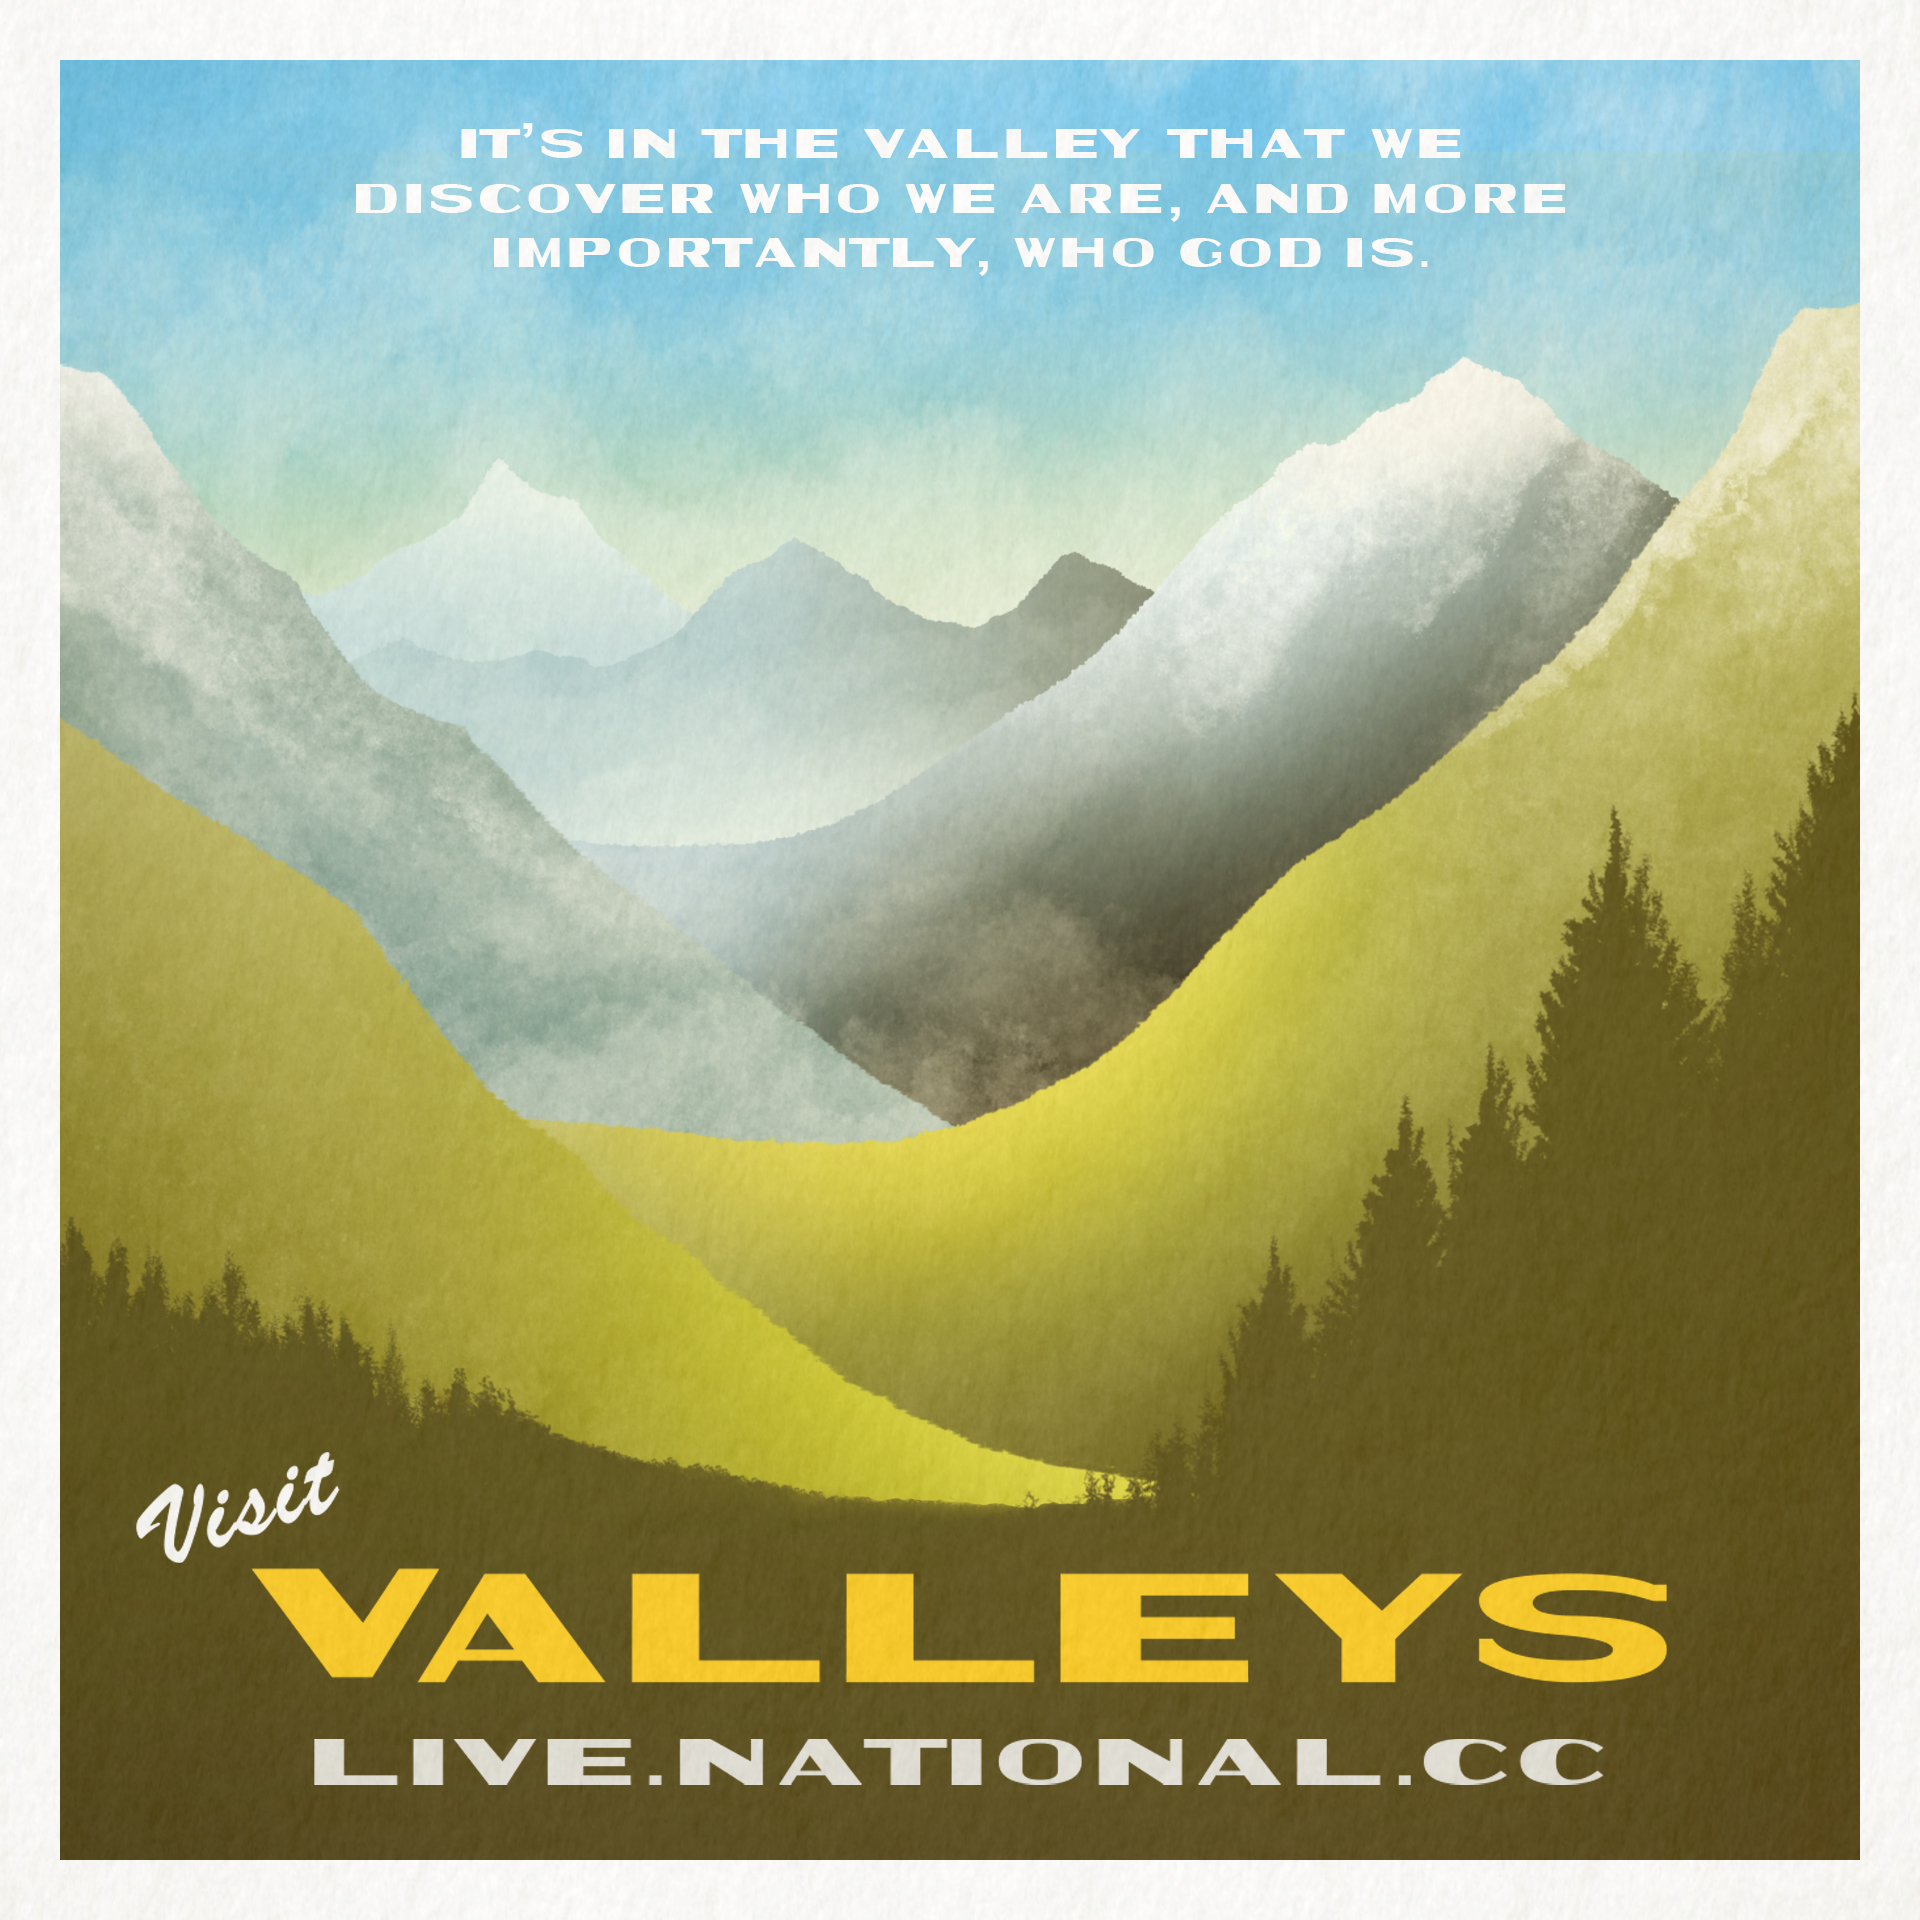 Valleys Cover Image